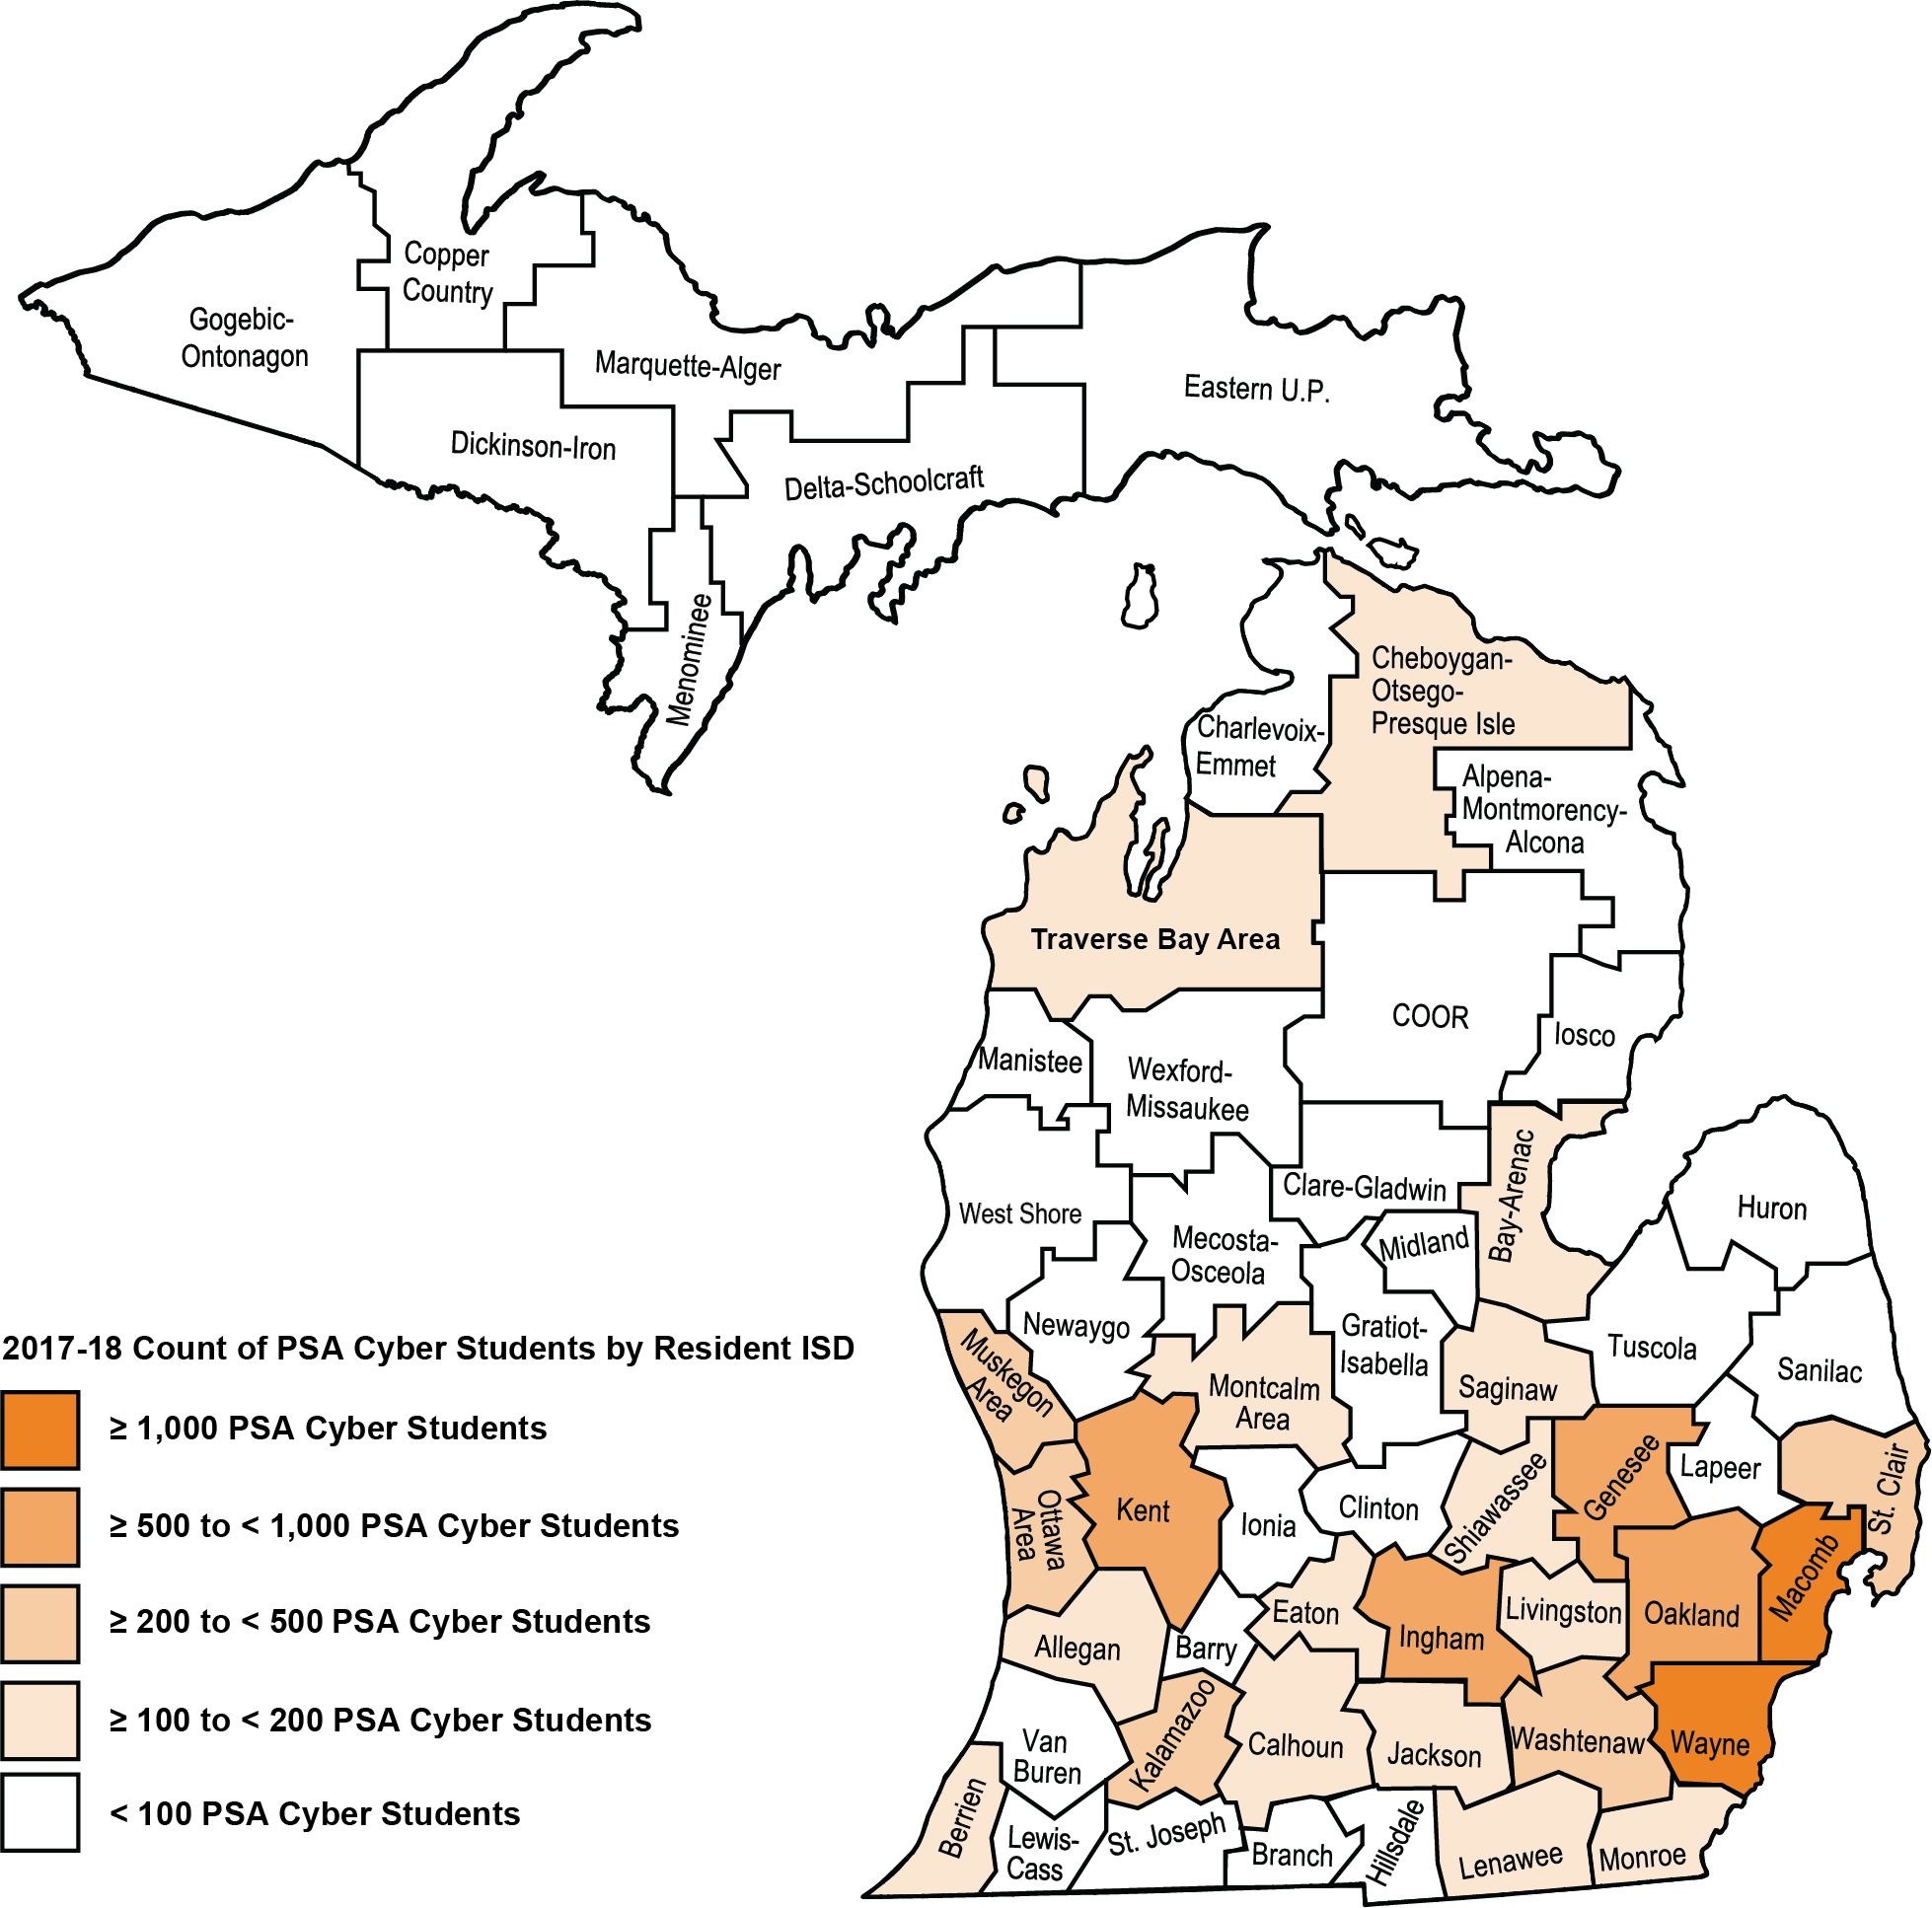 Map shows Michigan ISDs colored by the percentage of PSA cyber students by resident ISD. The majority of counties are white meaning they have less than 100 PSA cyber students in 2017-18. Counties with the highest percentage cluster around the Wayne, Macomb, Ingham, and Kent counties.